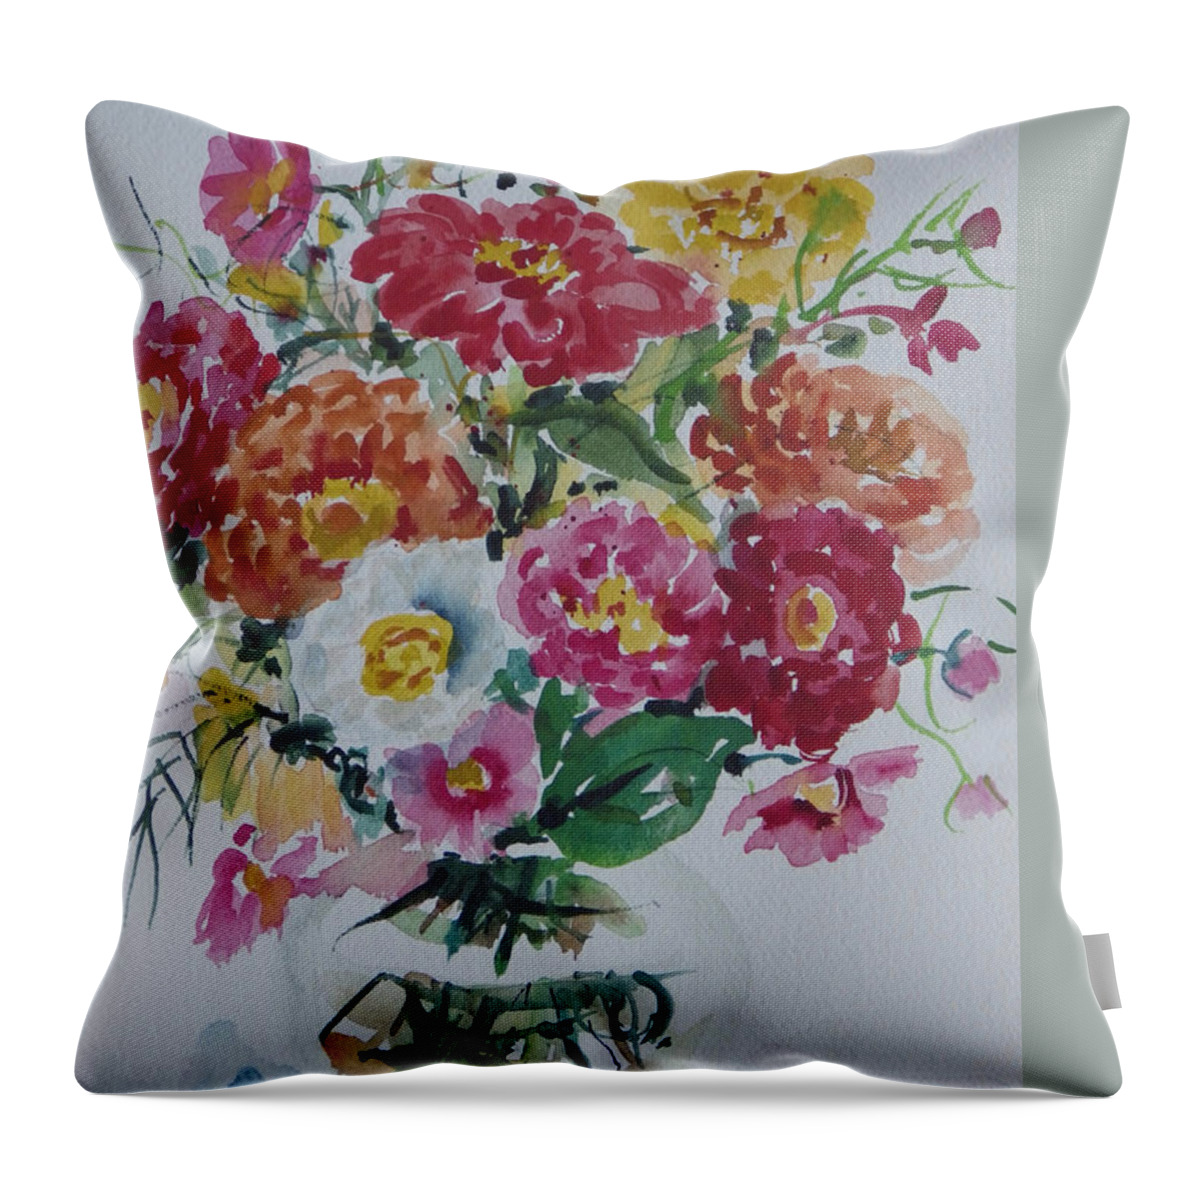 Flowers Throw Pillow featuring the painting Floral Still Life #3 by Ingrid Dohm